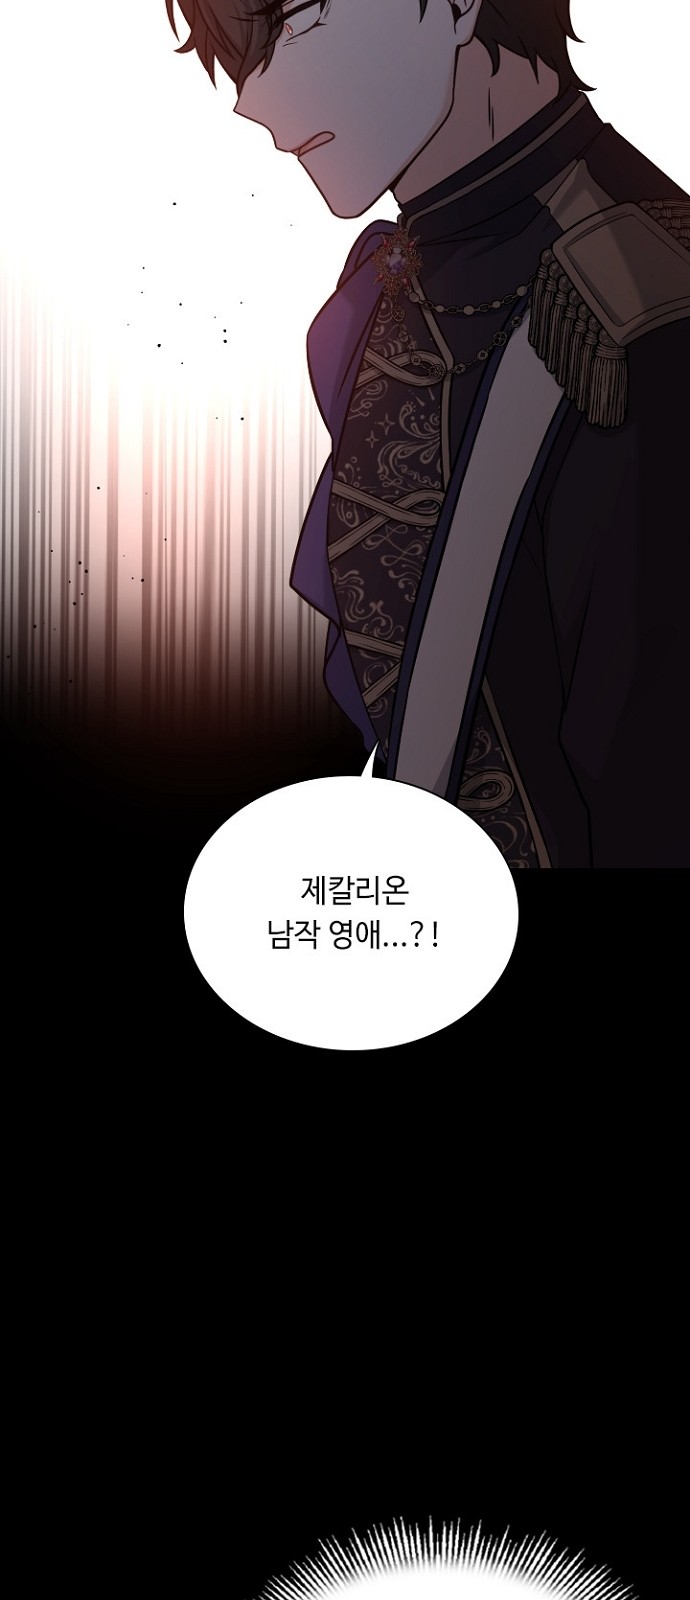 His Majesty's Proposal (A Night With the Emperor) - Chapter 35 - Page 3